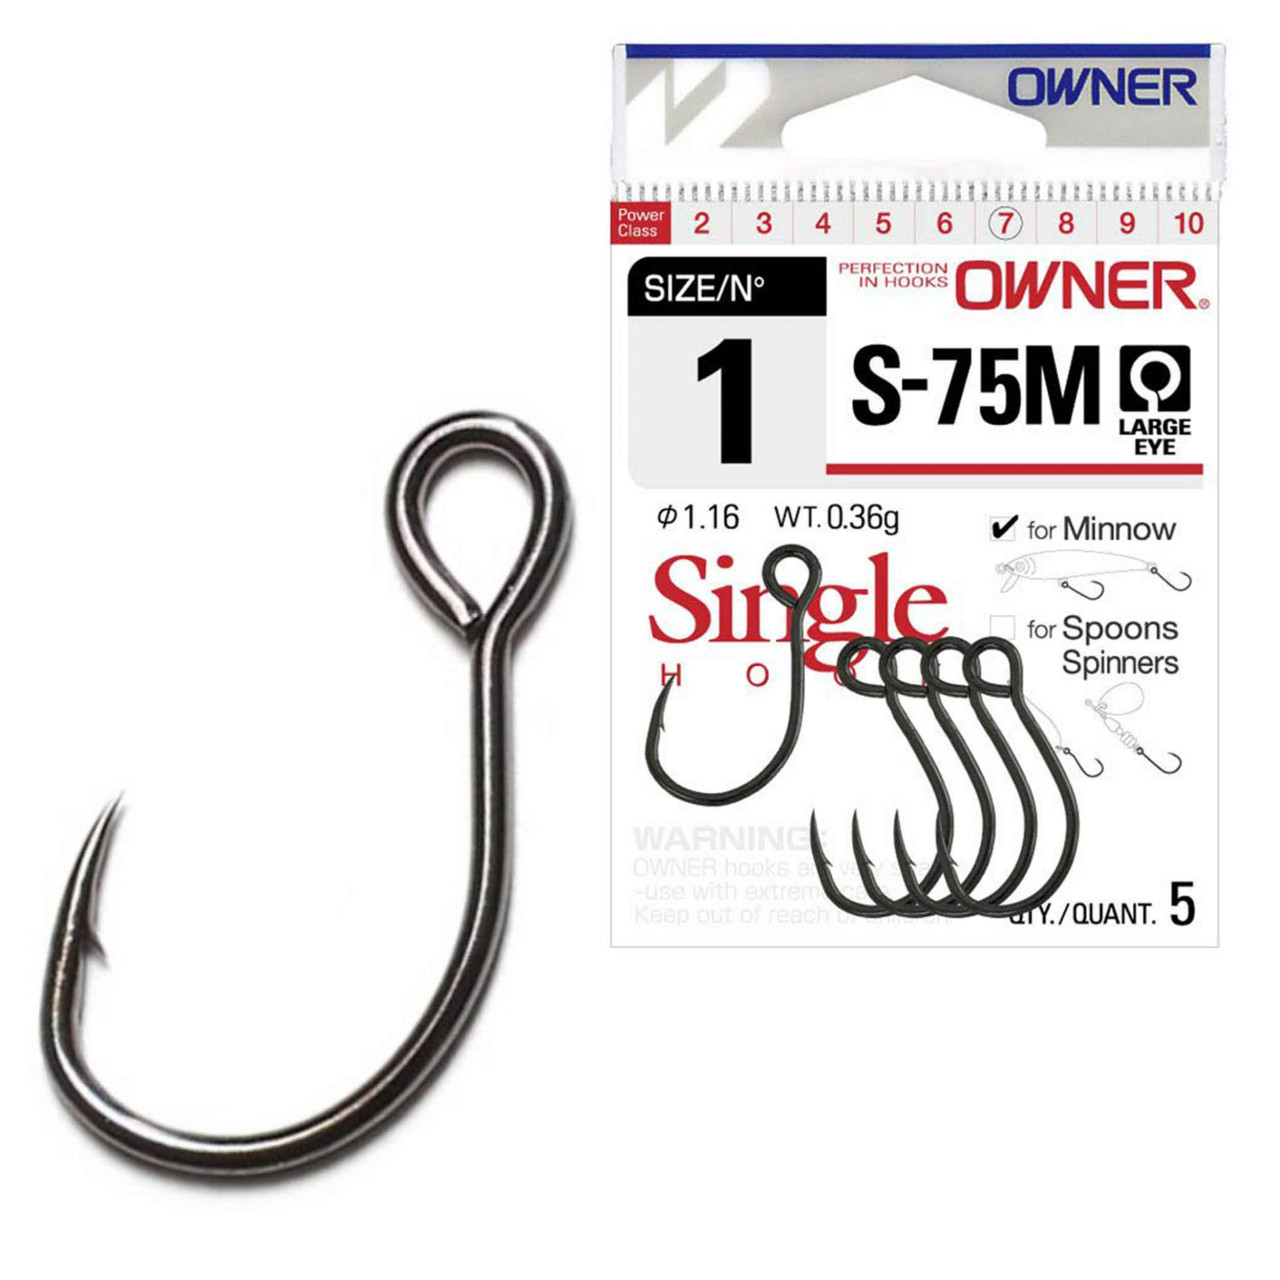 Carlig MMT Owner S-75M No.1 Minnow